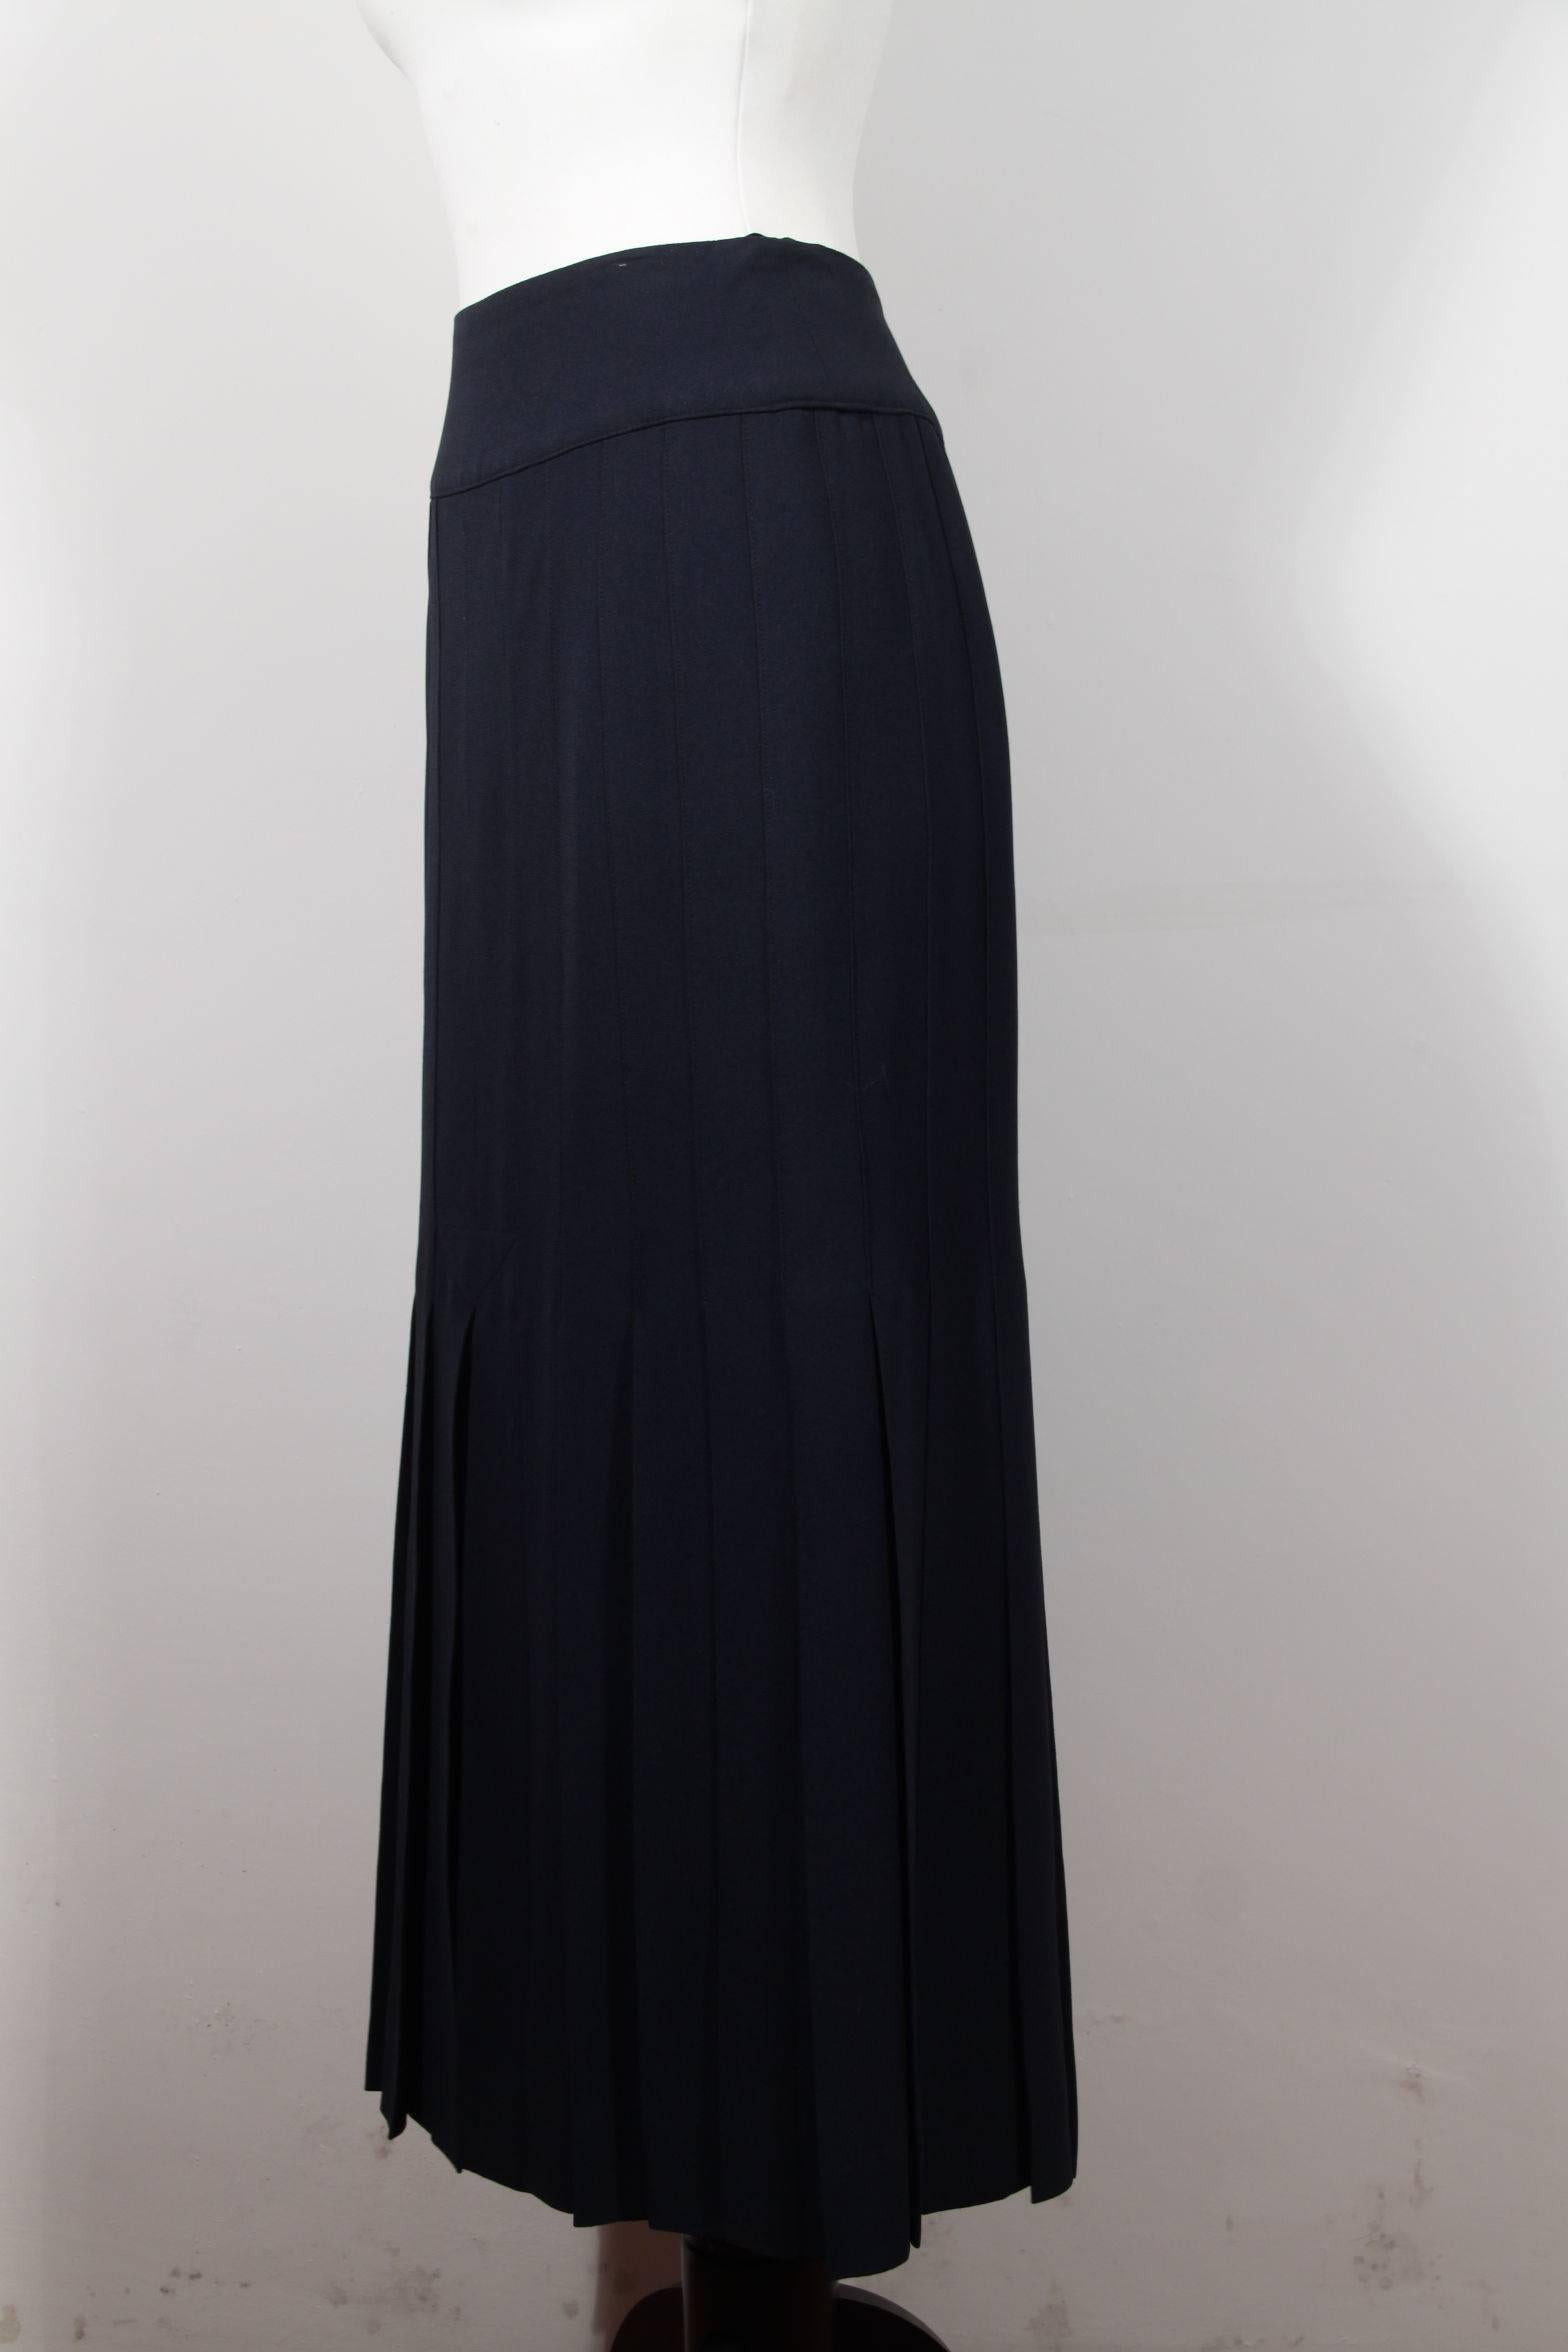 CHANEL BOUTIQUE Vintage Navy Blue Long MAXI SKIRT w/ PLEATS Size 38 FR In Excellent Condition In Rome, Rome